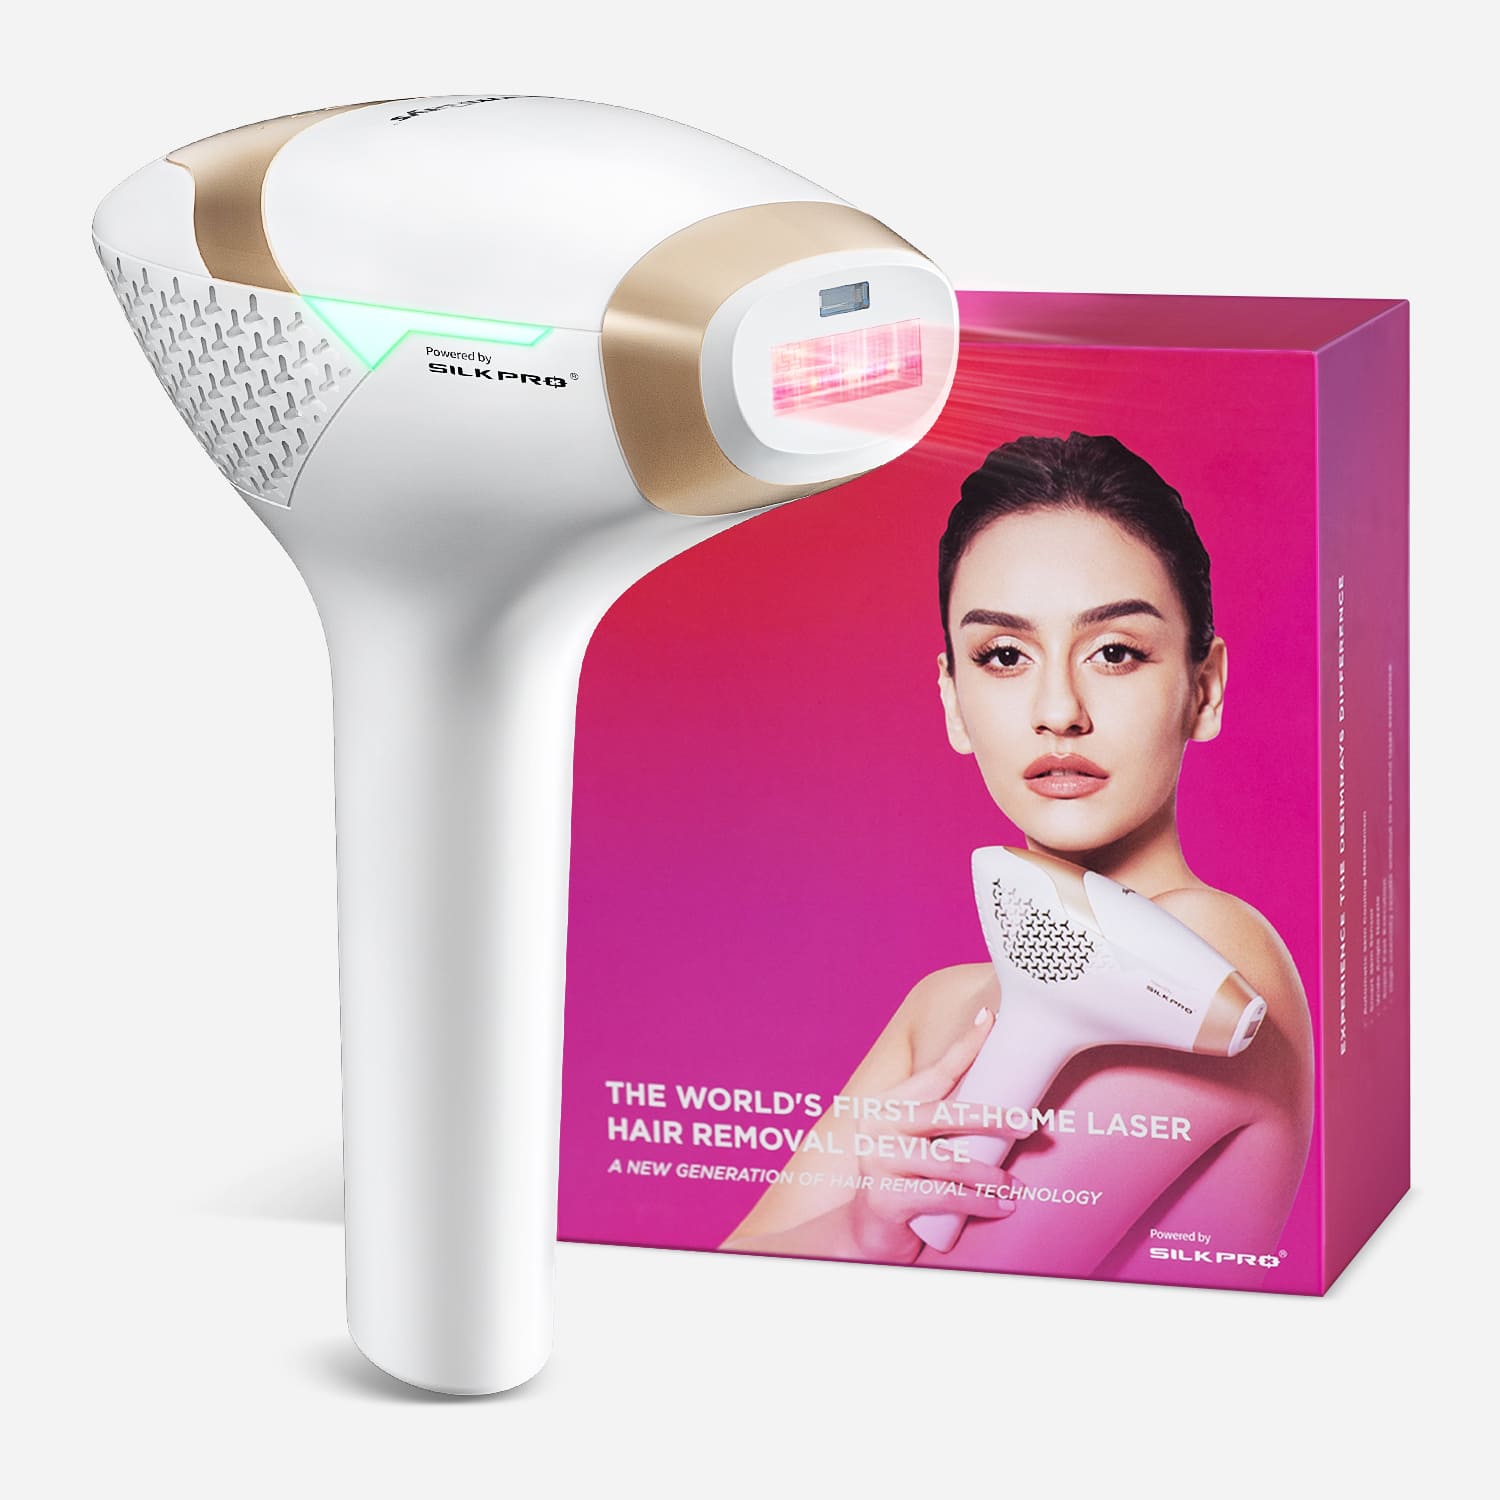 DermRays V4S Laser Hair Removal, Up to 21J, Specifically For Sensitive Skin